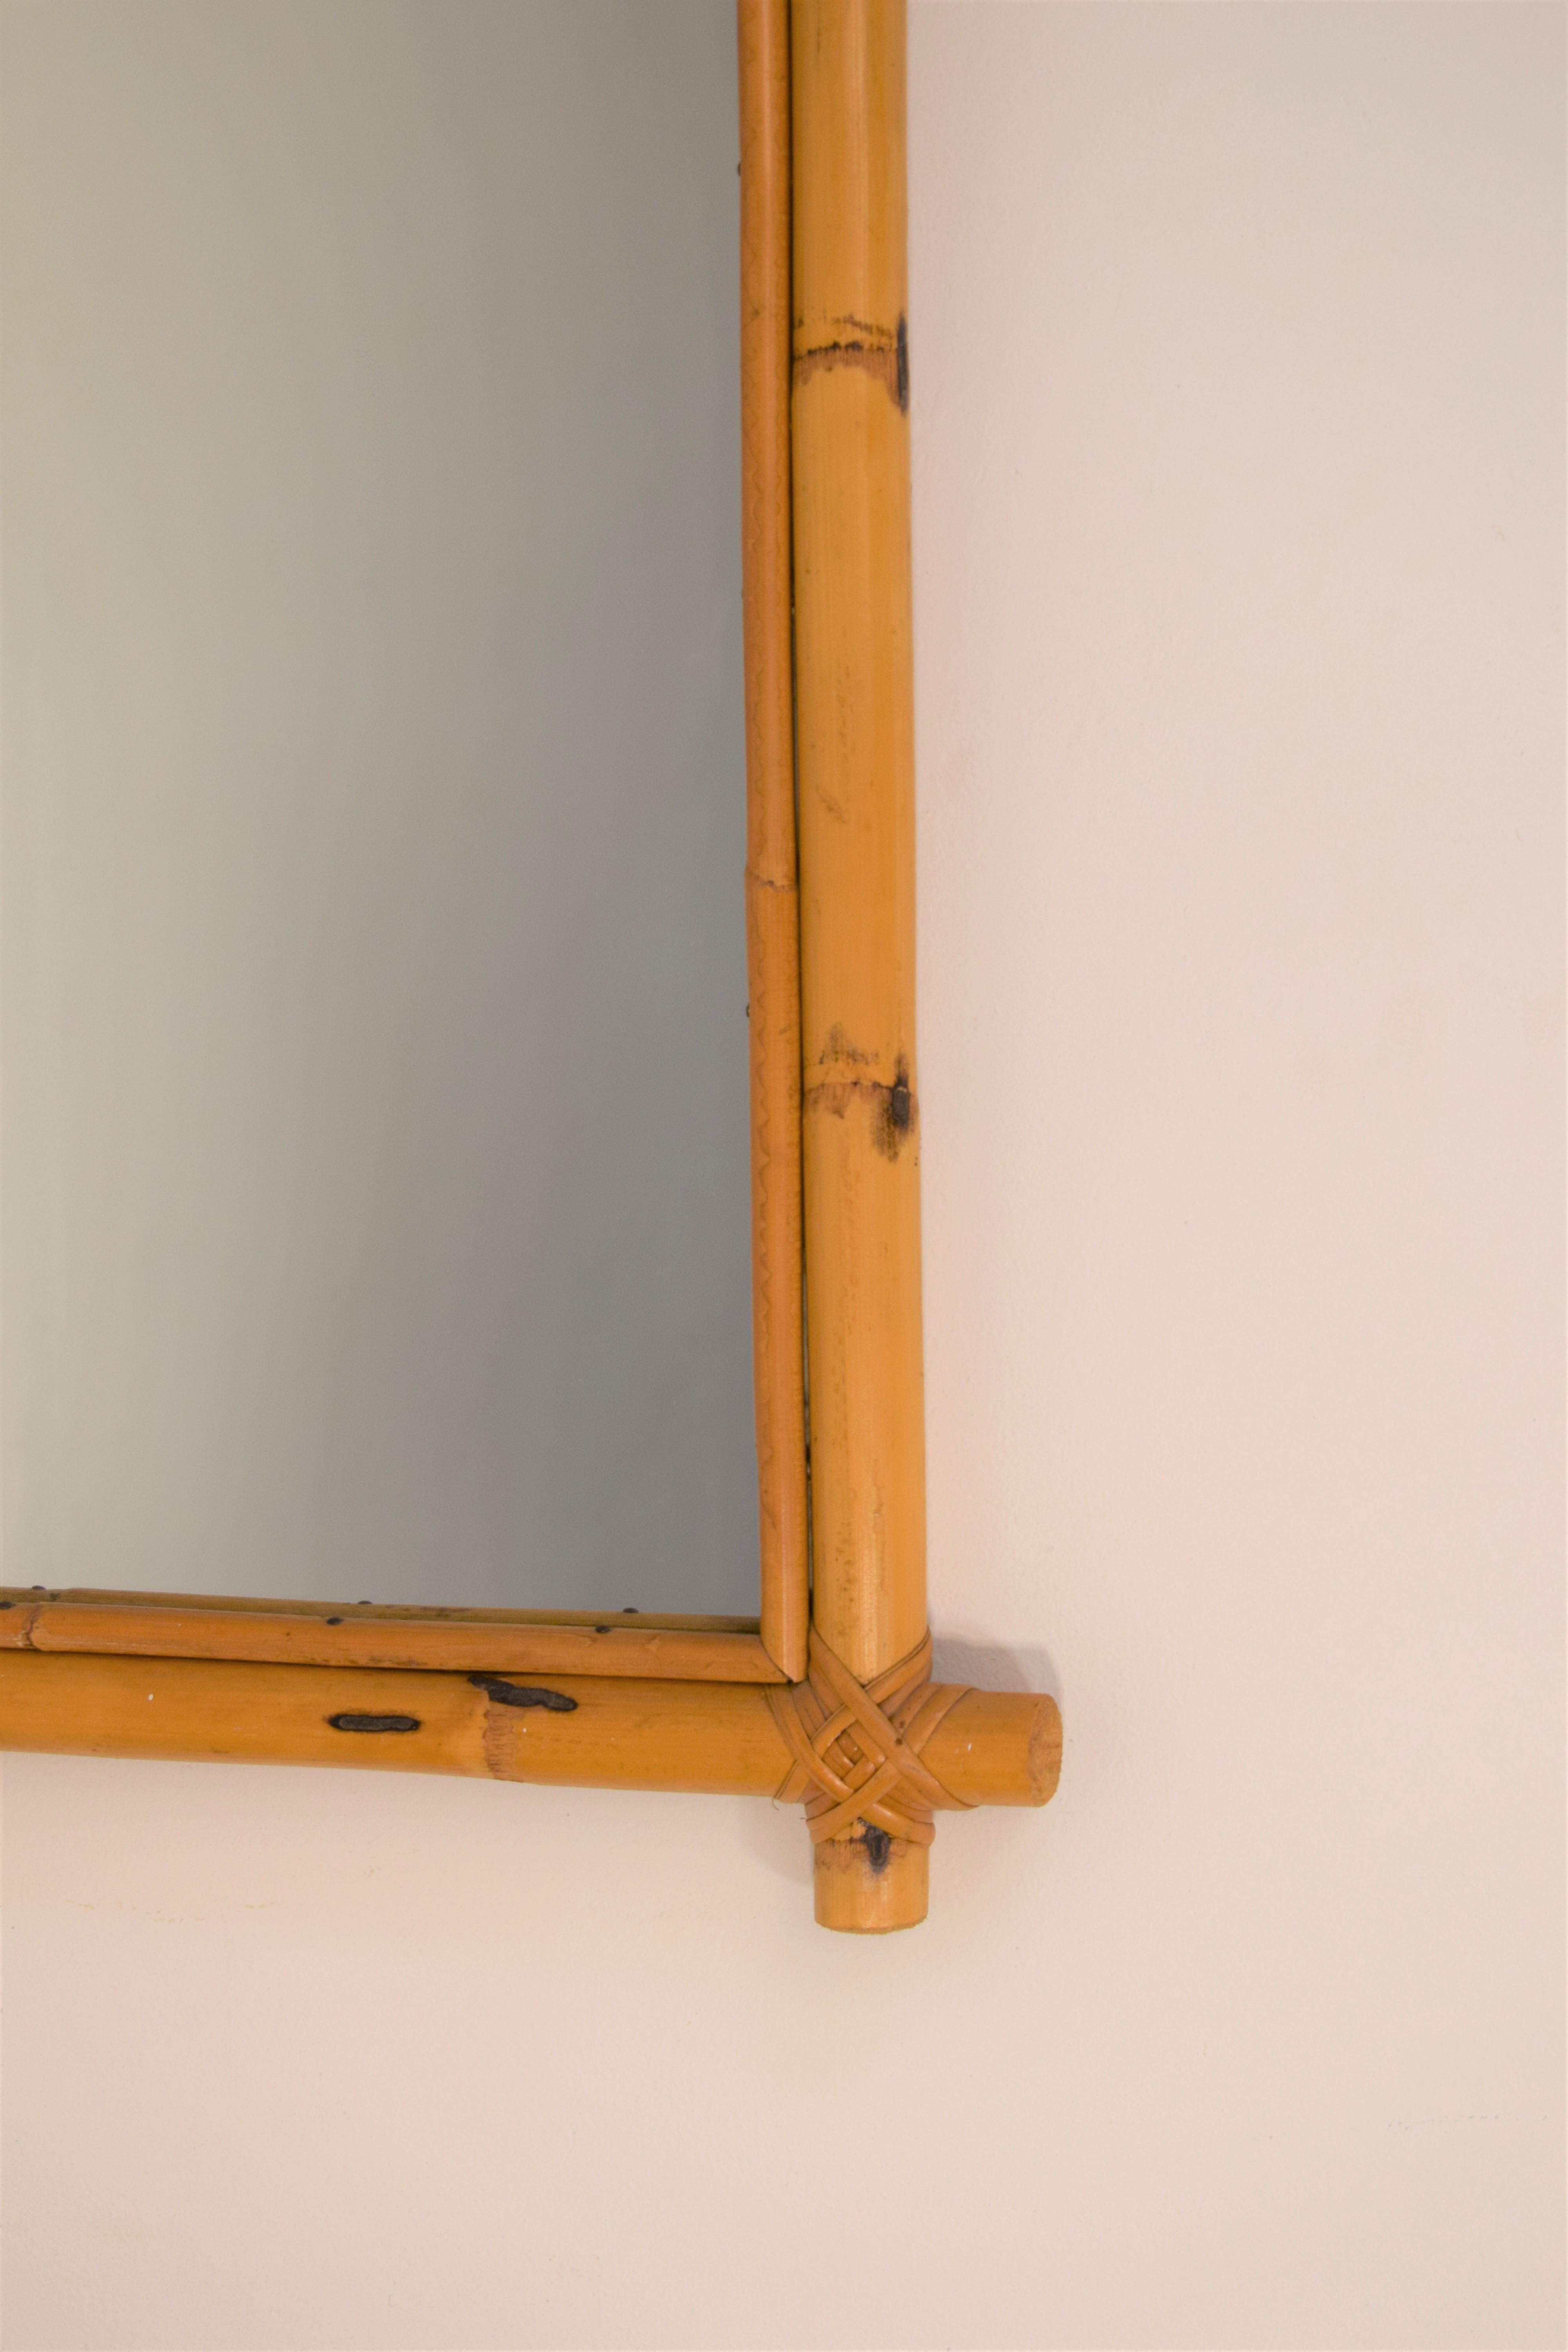 Italian bamboo wall mirror, 1960s.
2 available.
Dimensions: H= 82 cm; W= 46 cm; D= 3 cm.